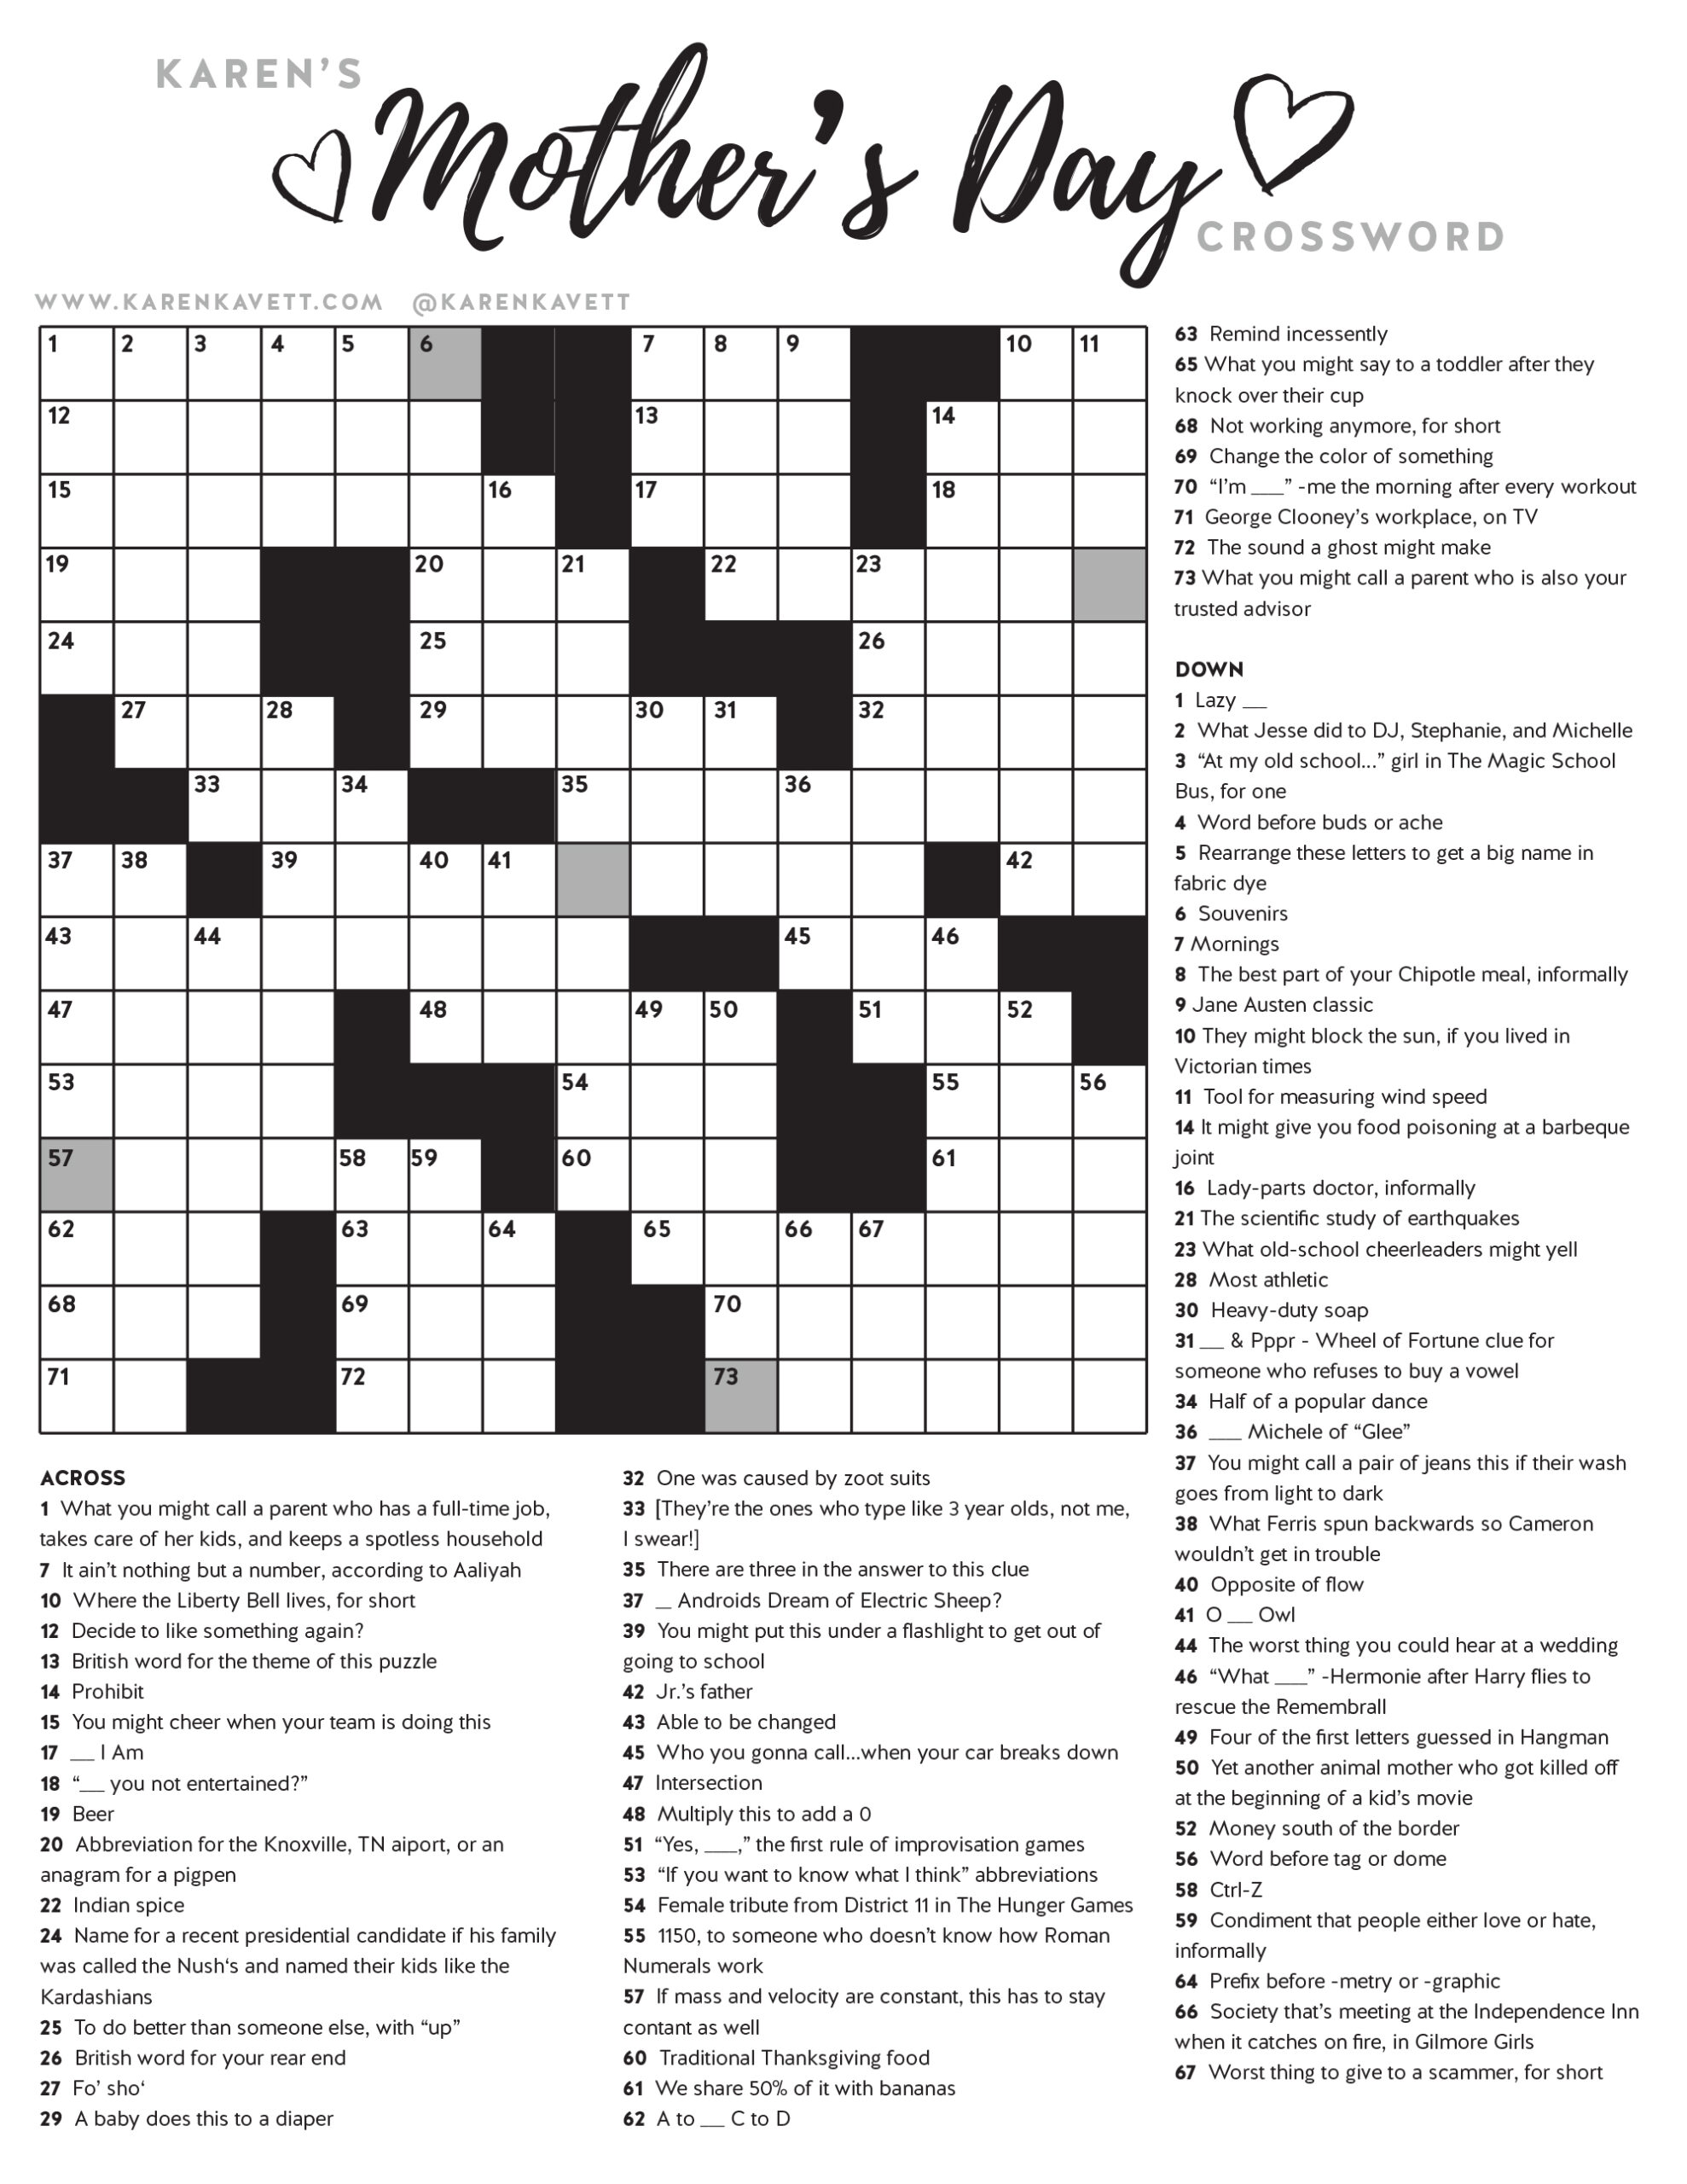 mother-s-day-crossword-puzzle-puzzle-cheer